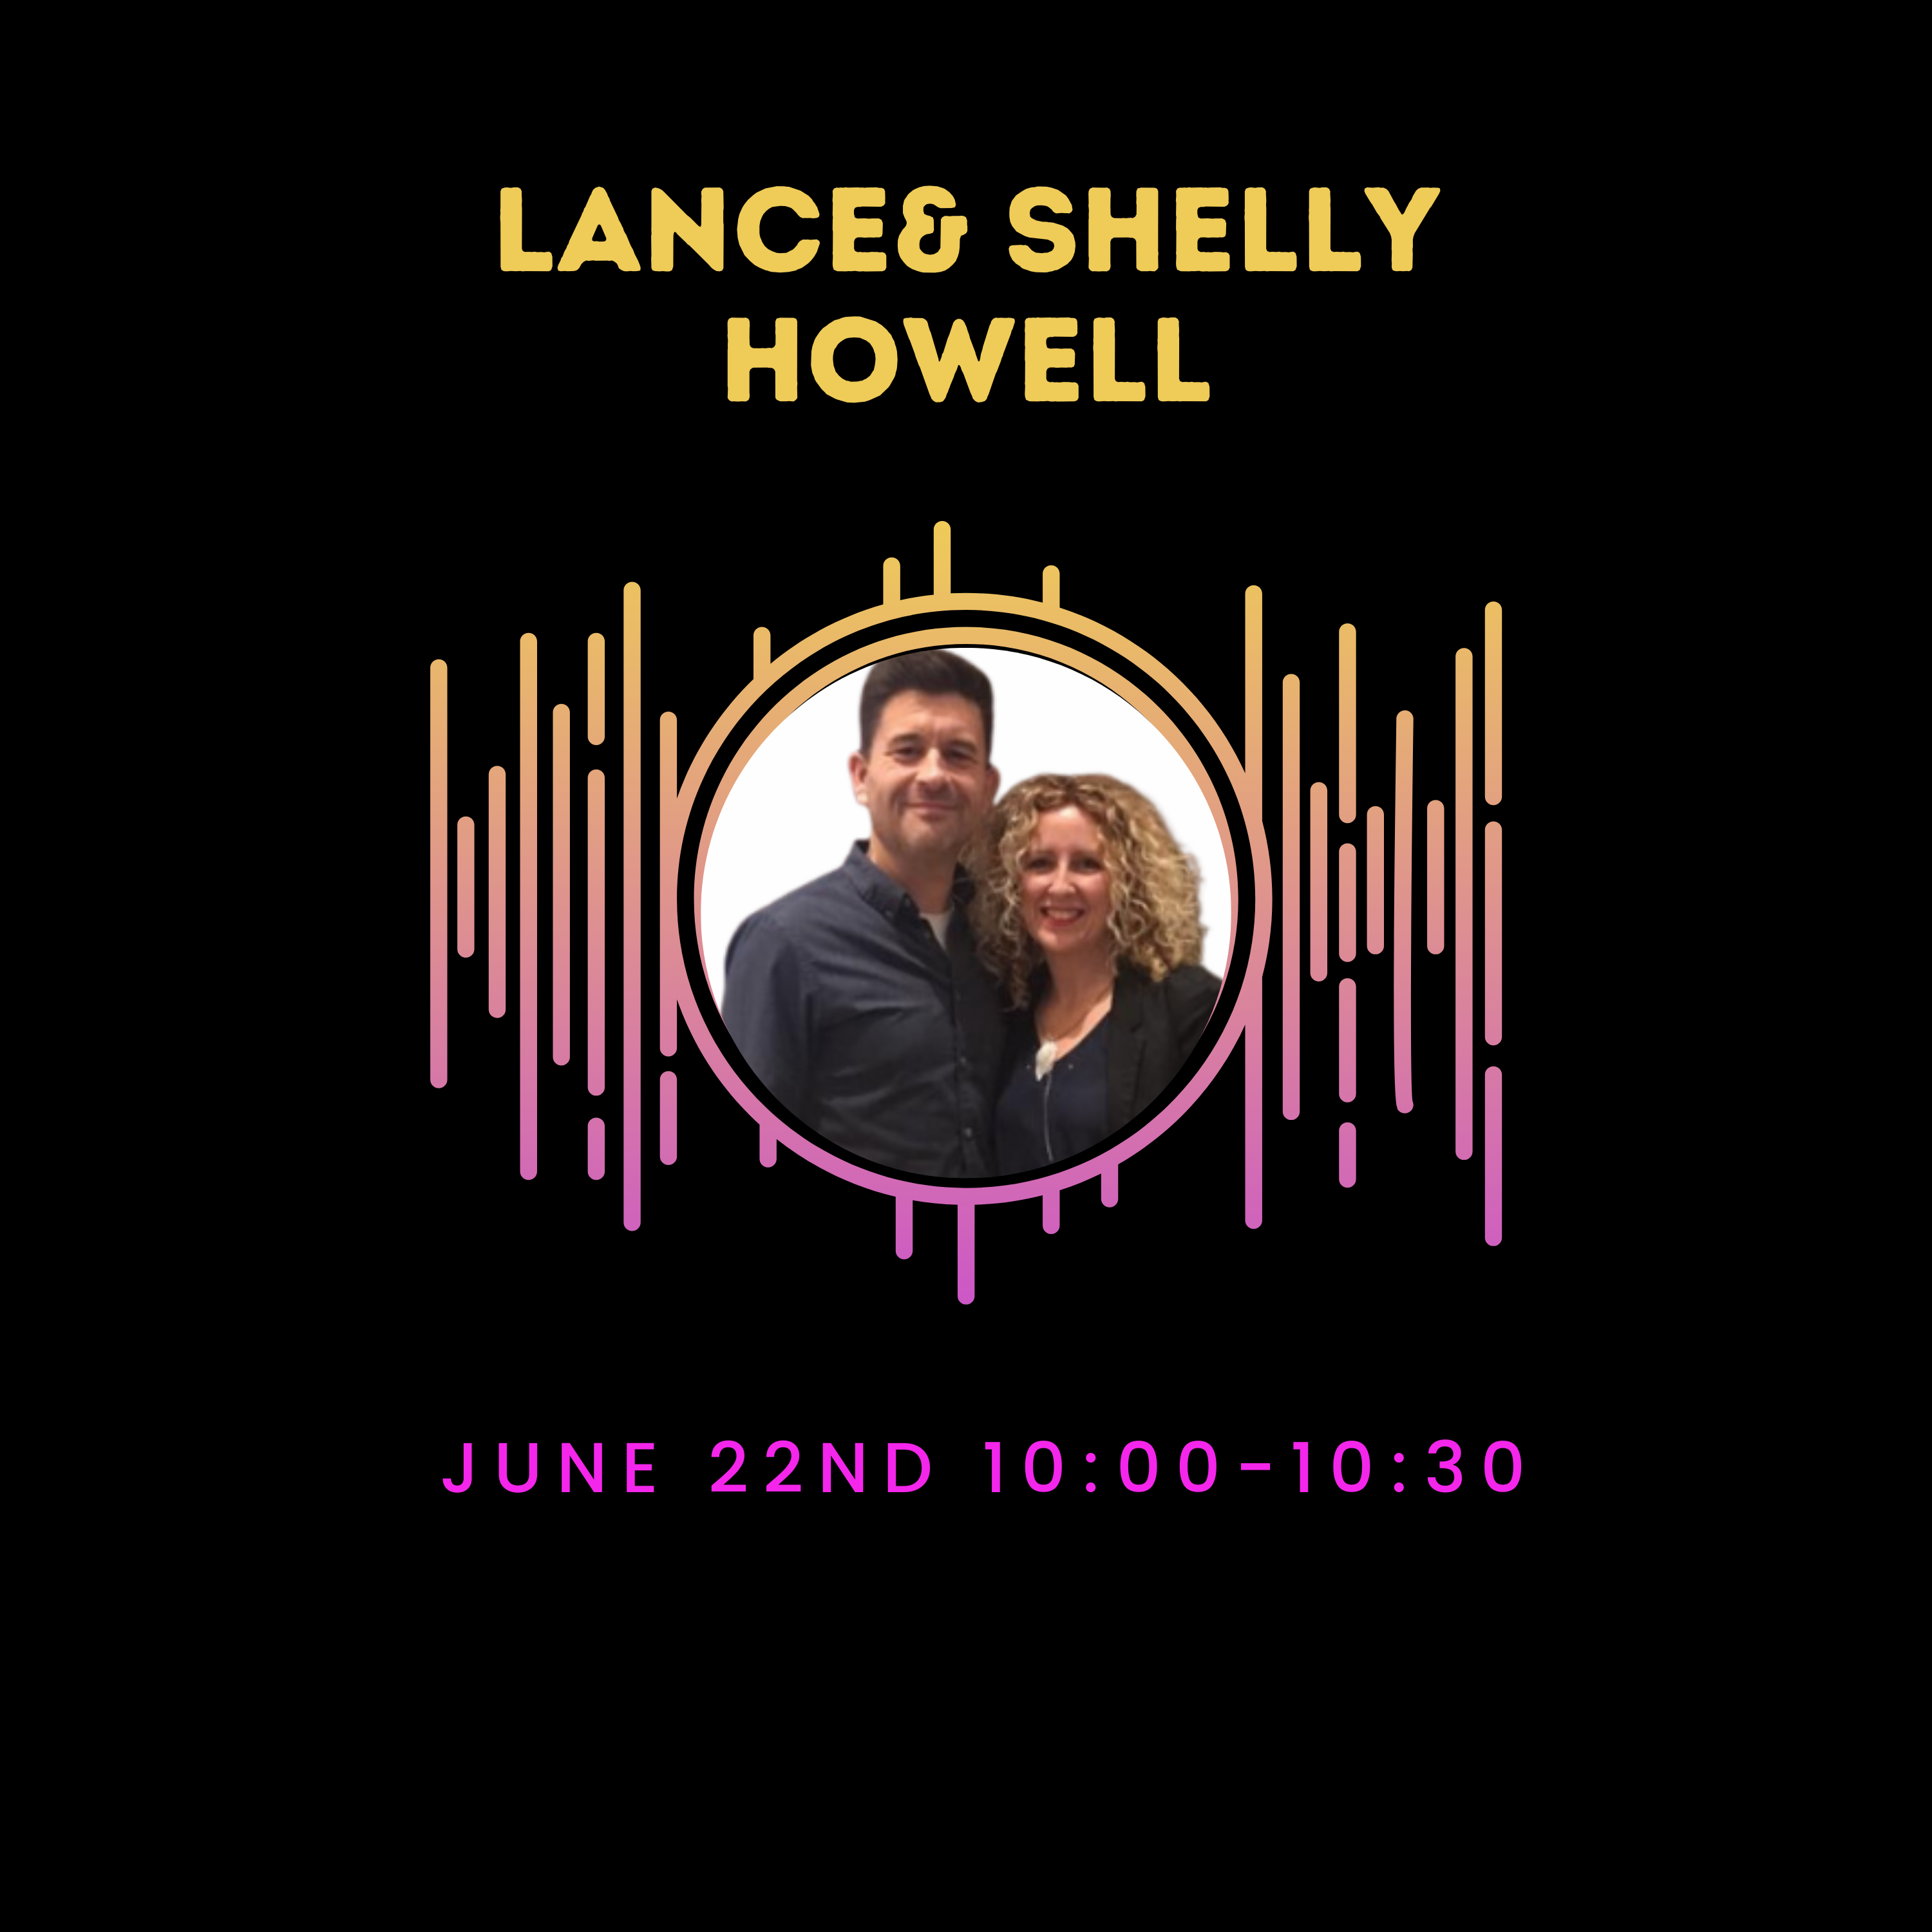 Promotional graphic for the Reflect Live Podcast featuring a portrait of Lance and Shelly Howell, a smiling couple, encircled by a pink and orange waveform graphic. The text above their photo reads 'LANCE & SHELLY HOWELL' in bold yellow letters. The date and time of their podcast appearance, 'JUNE 22ND 10:00–10:30AM', are displayed below their image, set against a black background. This image is used to advertise an upcoming joint interview segment with Lance and Shelly Howell on the podcast